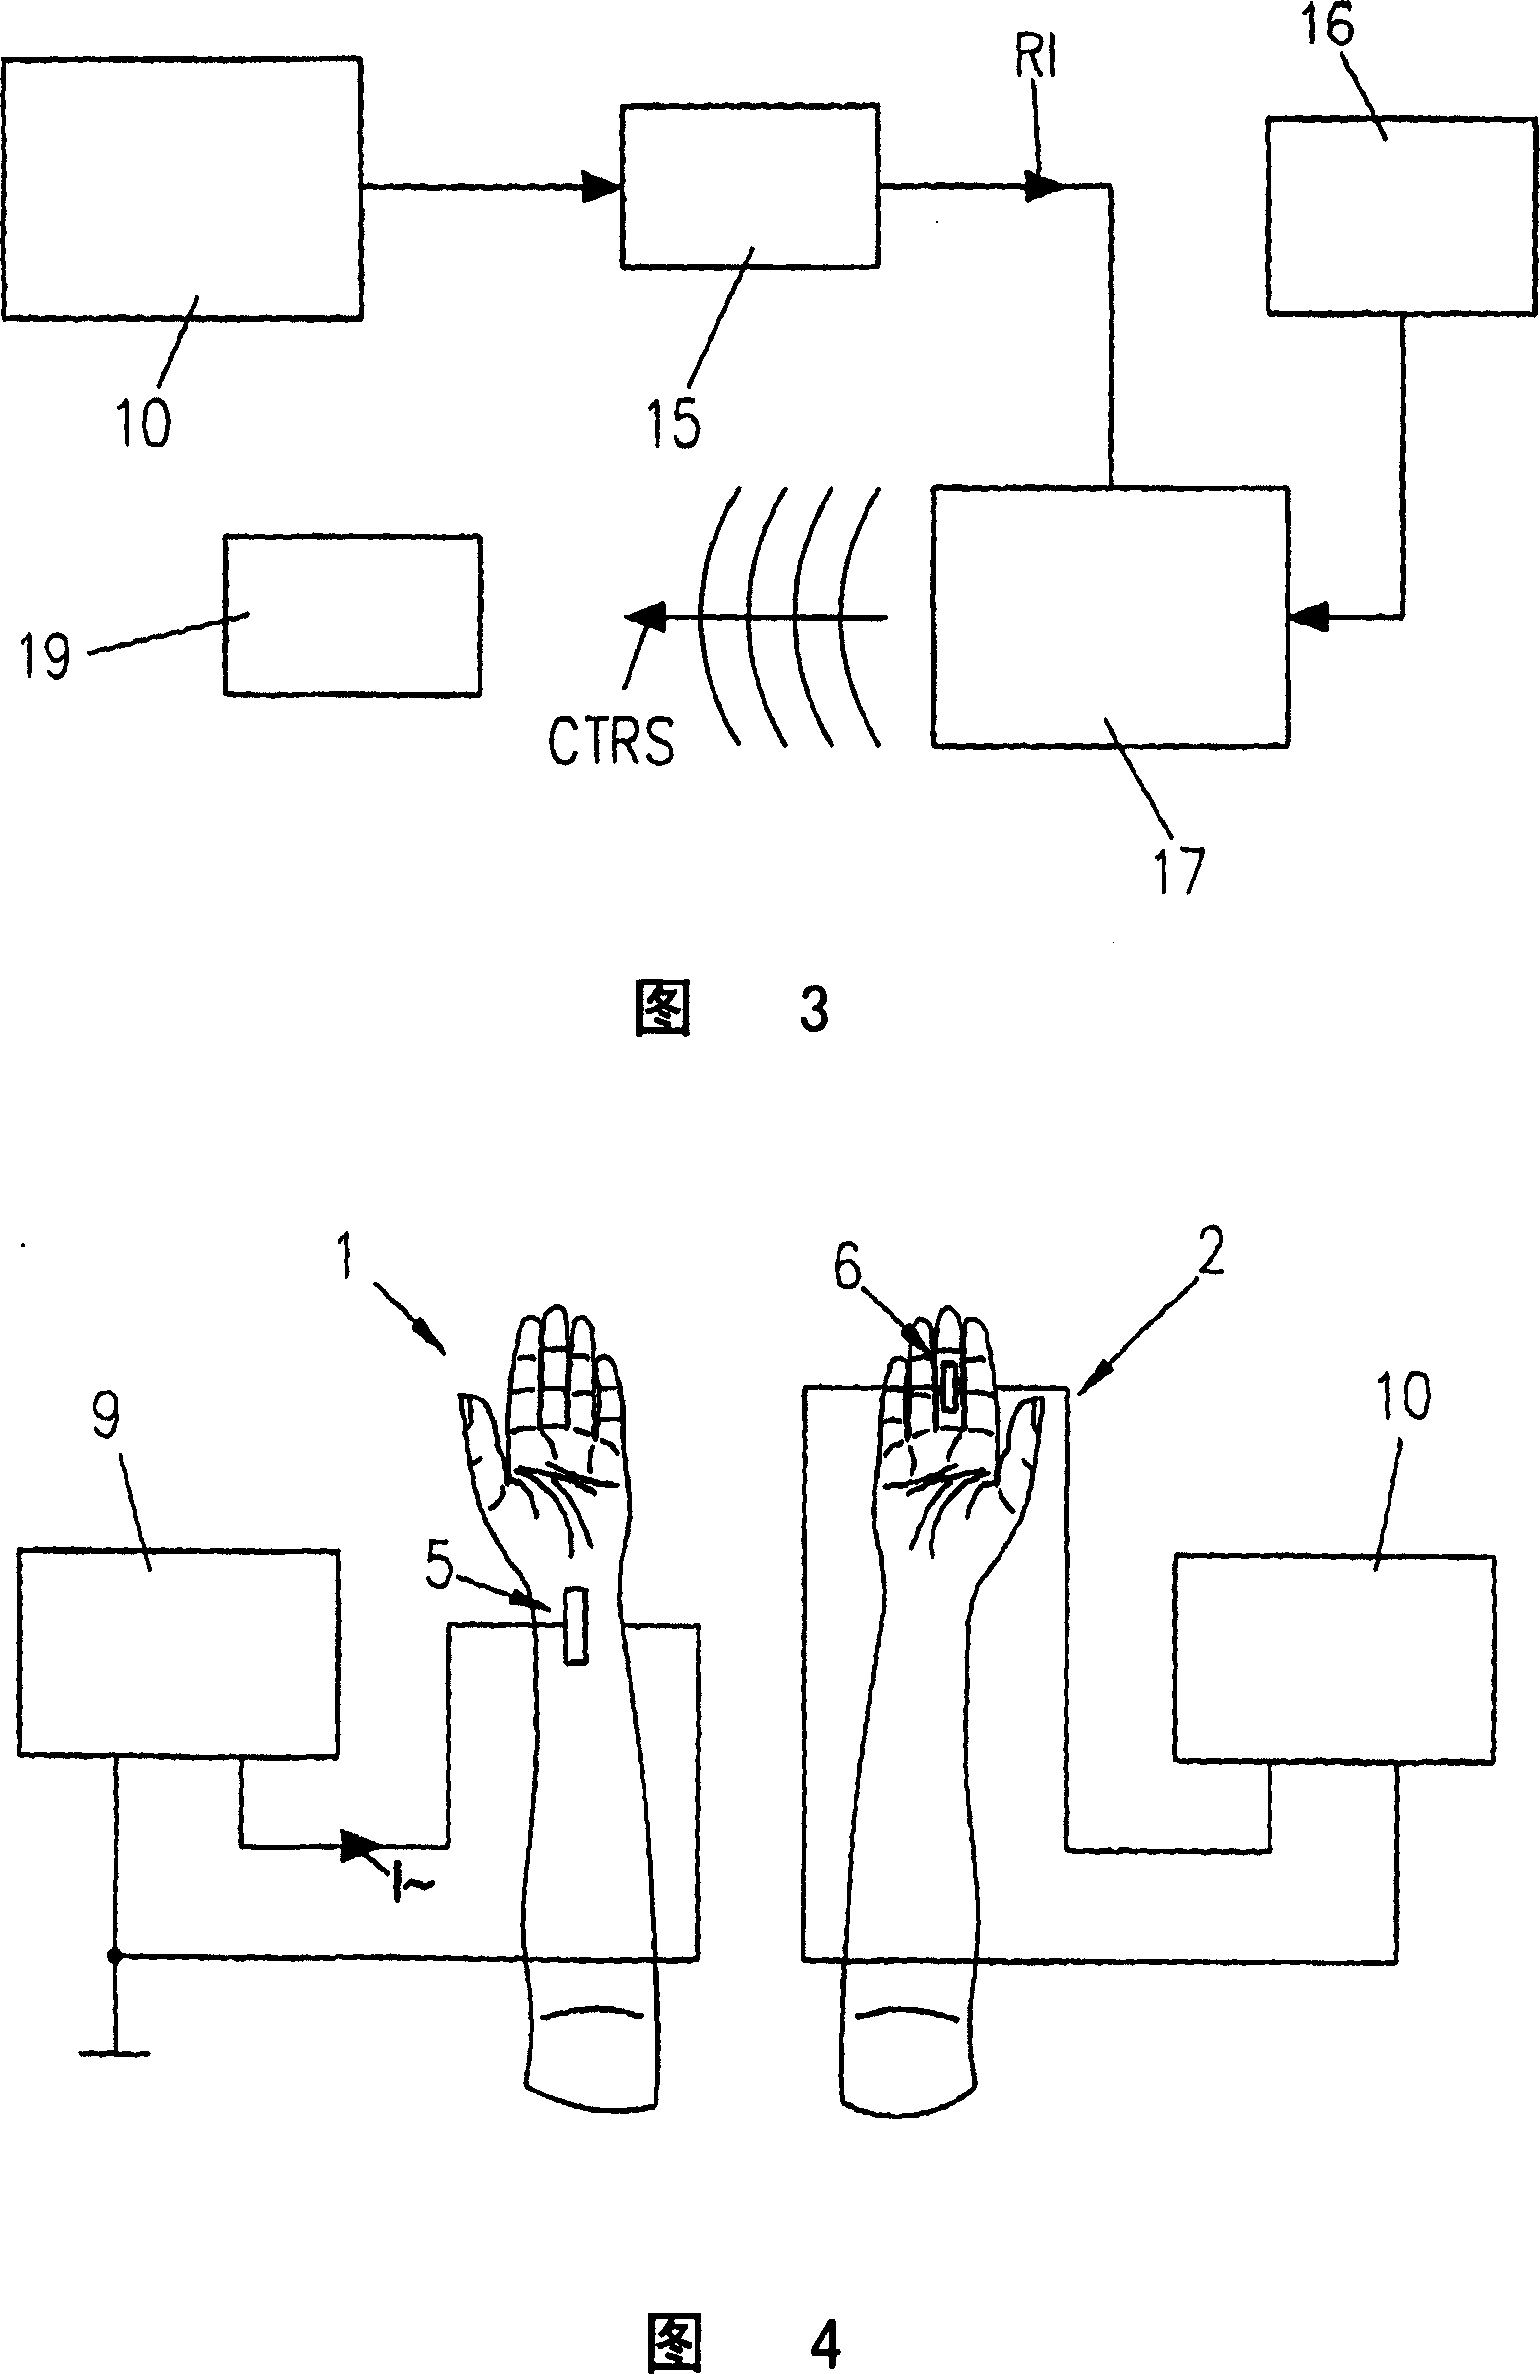 Using impedance in parts of living body for generating controlling signal for controllable device